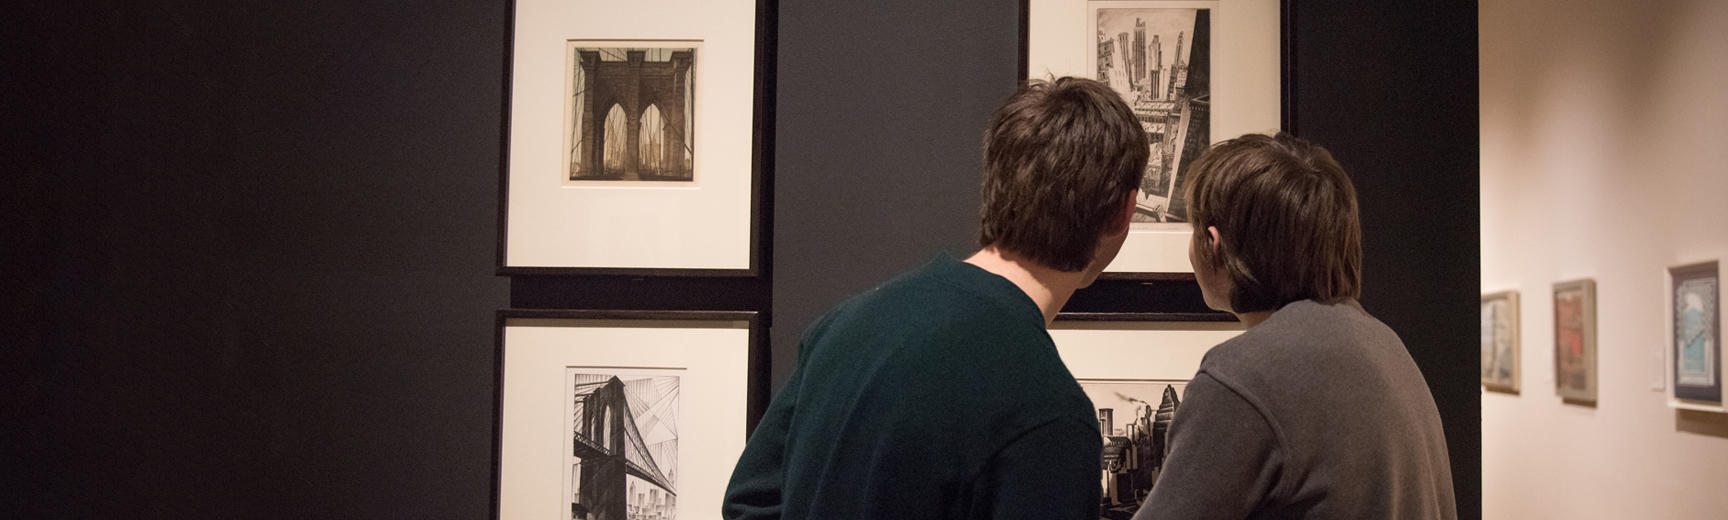 The backs of two visitors, who are looking closely at black and white artworks mounted on a dark wall in an exhibition gallery